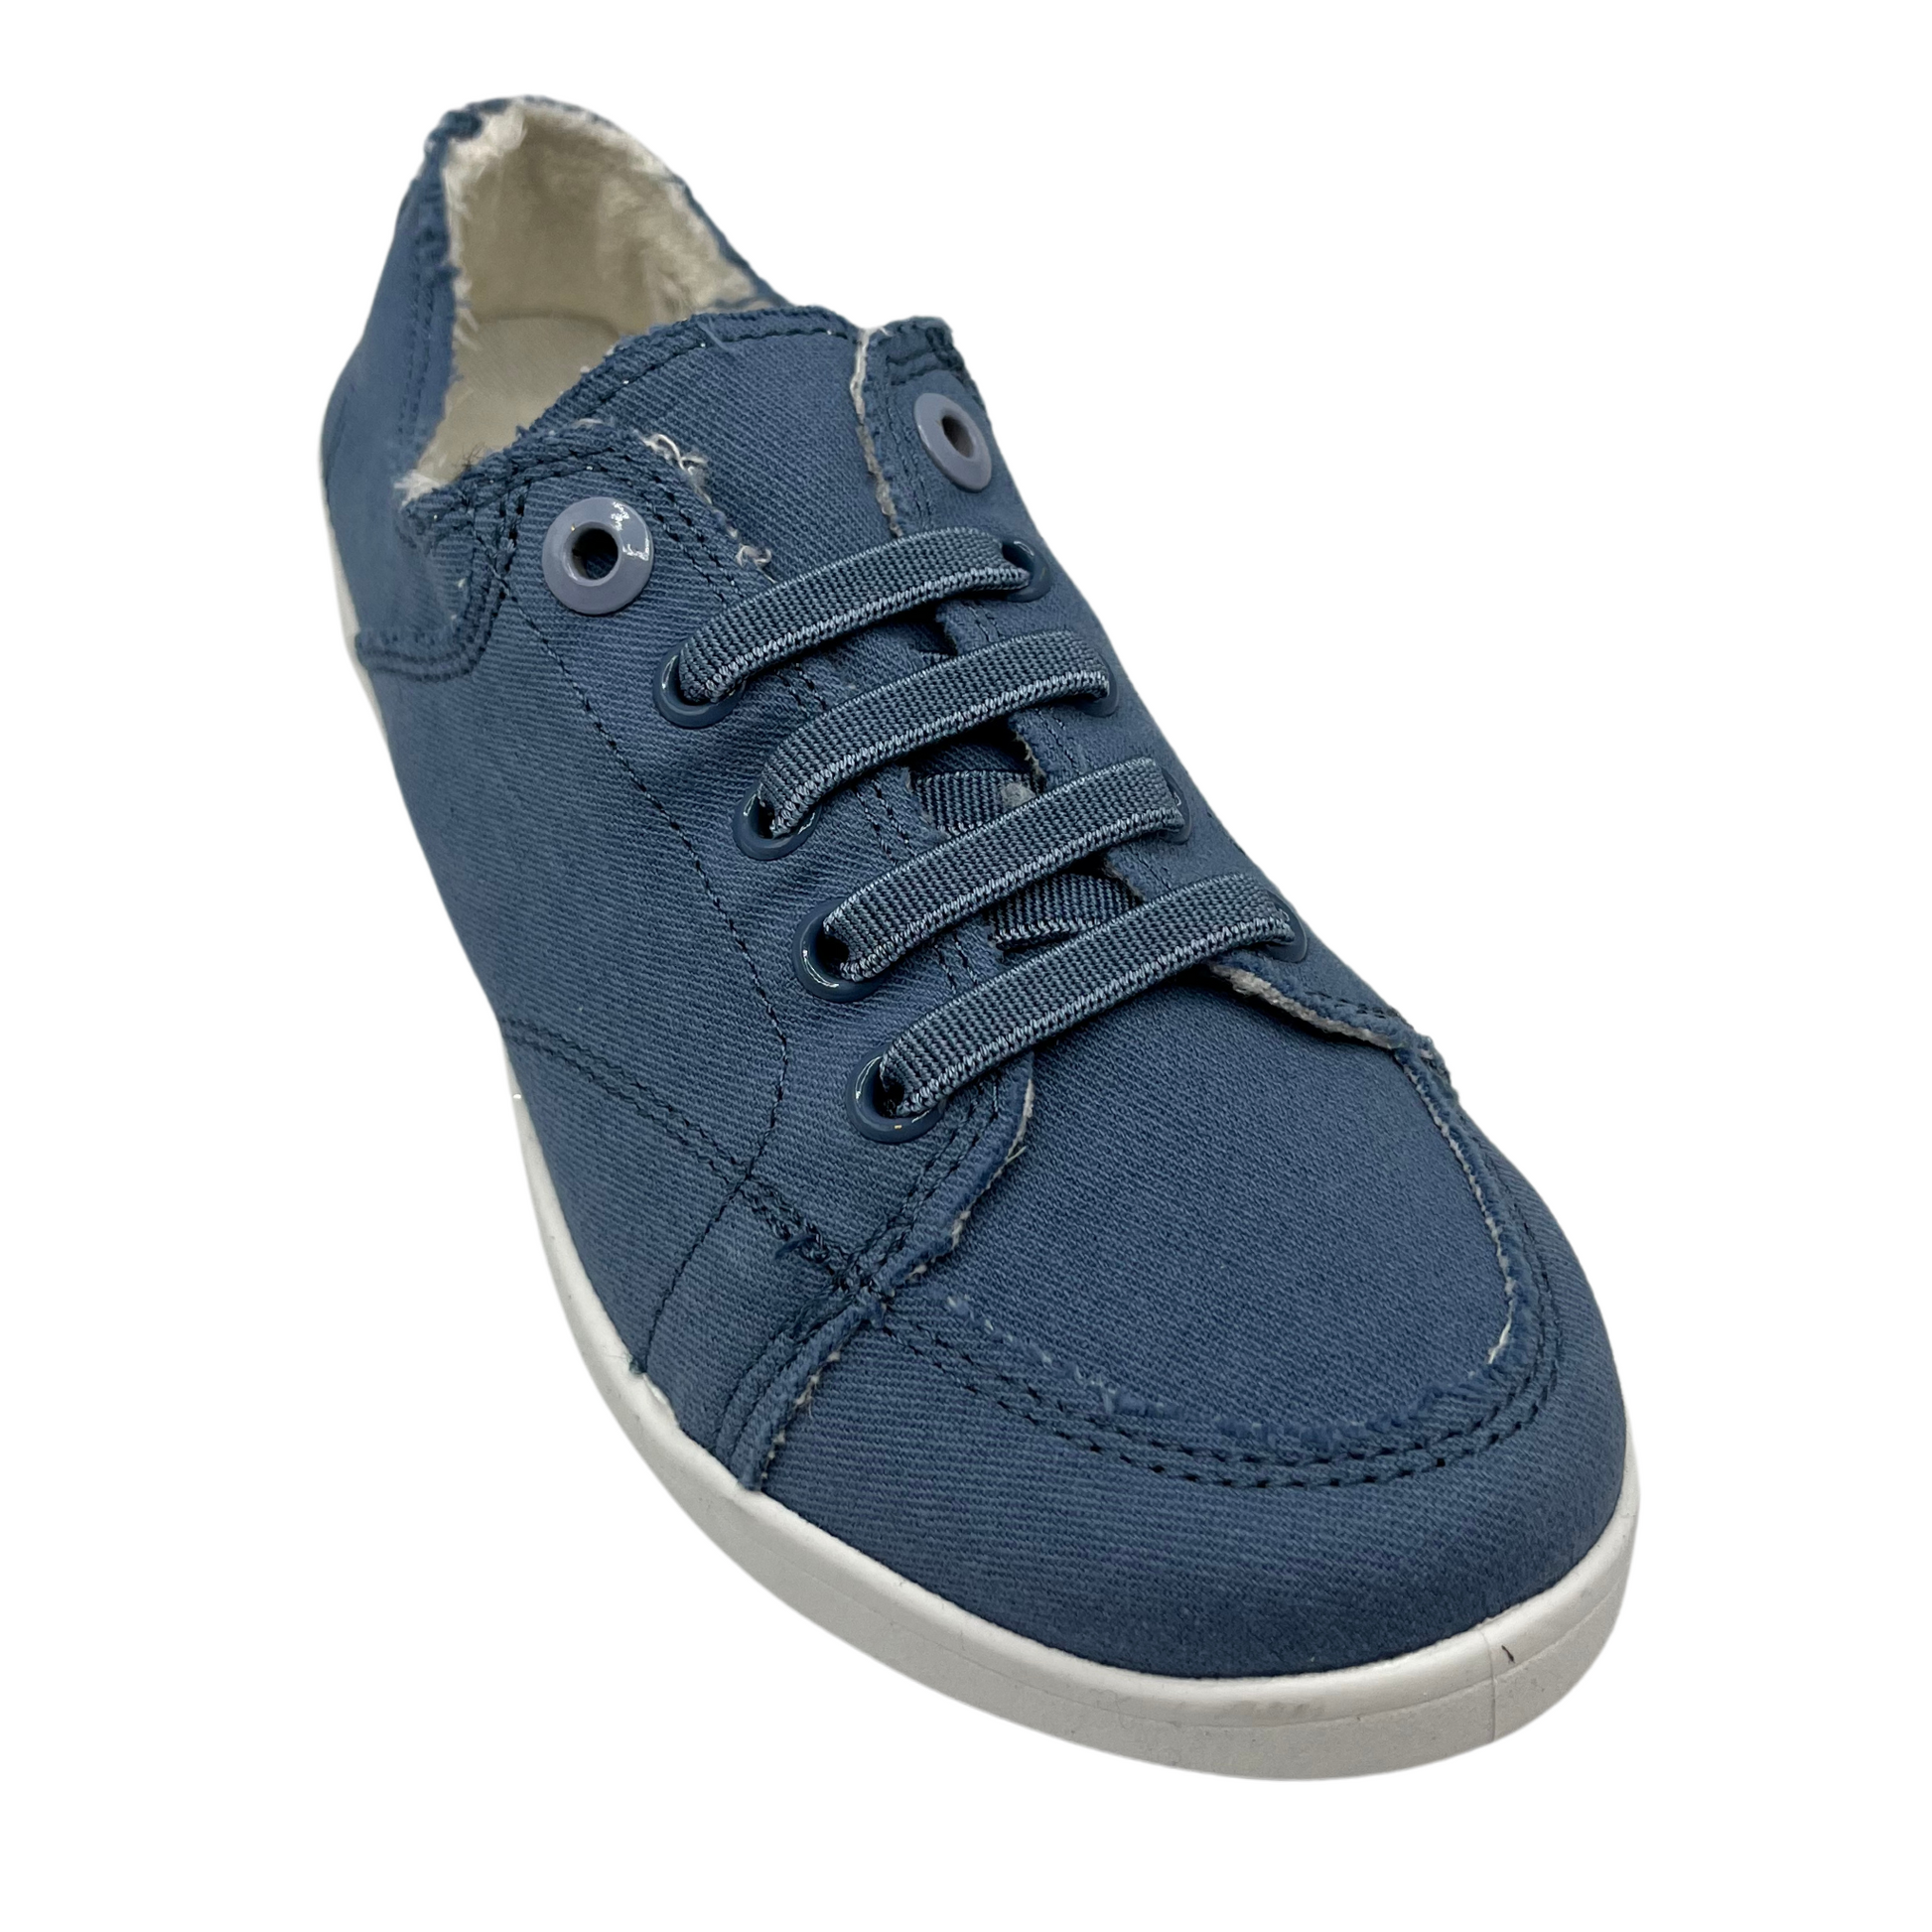 45 degree angled view of blue canvas sneaker with white rubber outsole